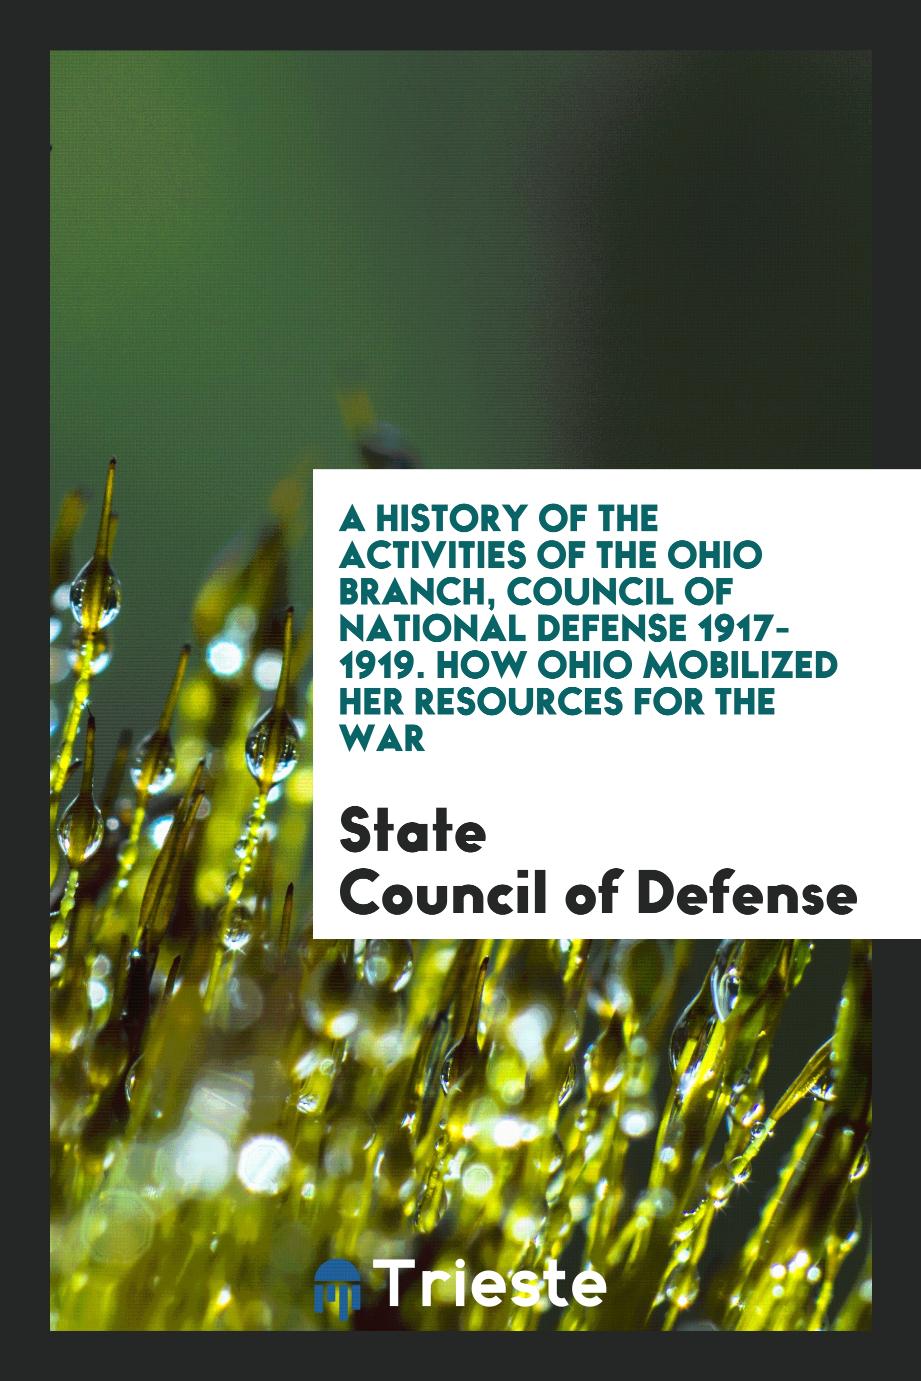 A History of the Activities of the Ohio Branch, Council of National Defense 1917-1919. How Ohio Mobilized Her Resources for the War